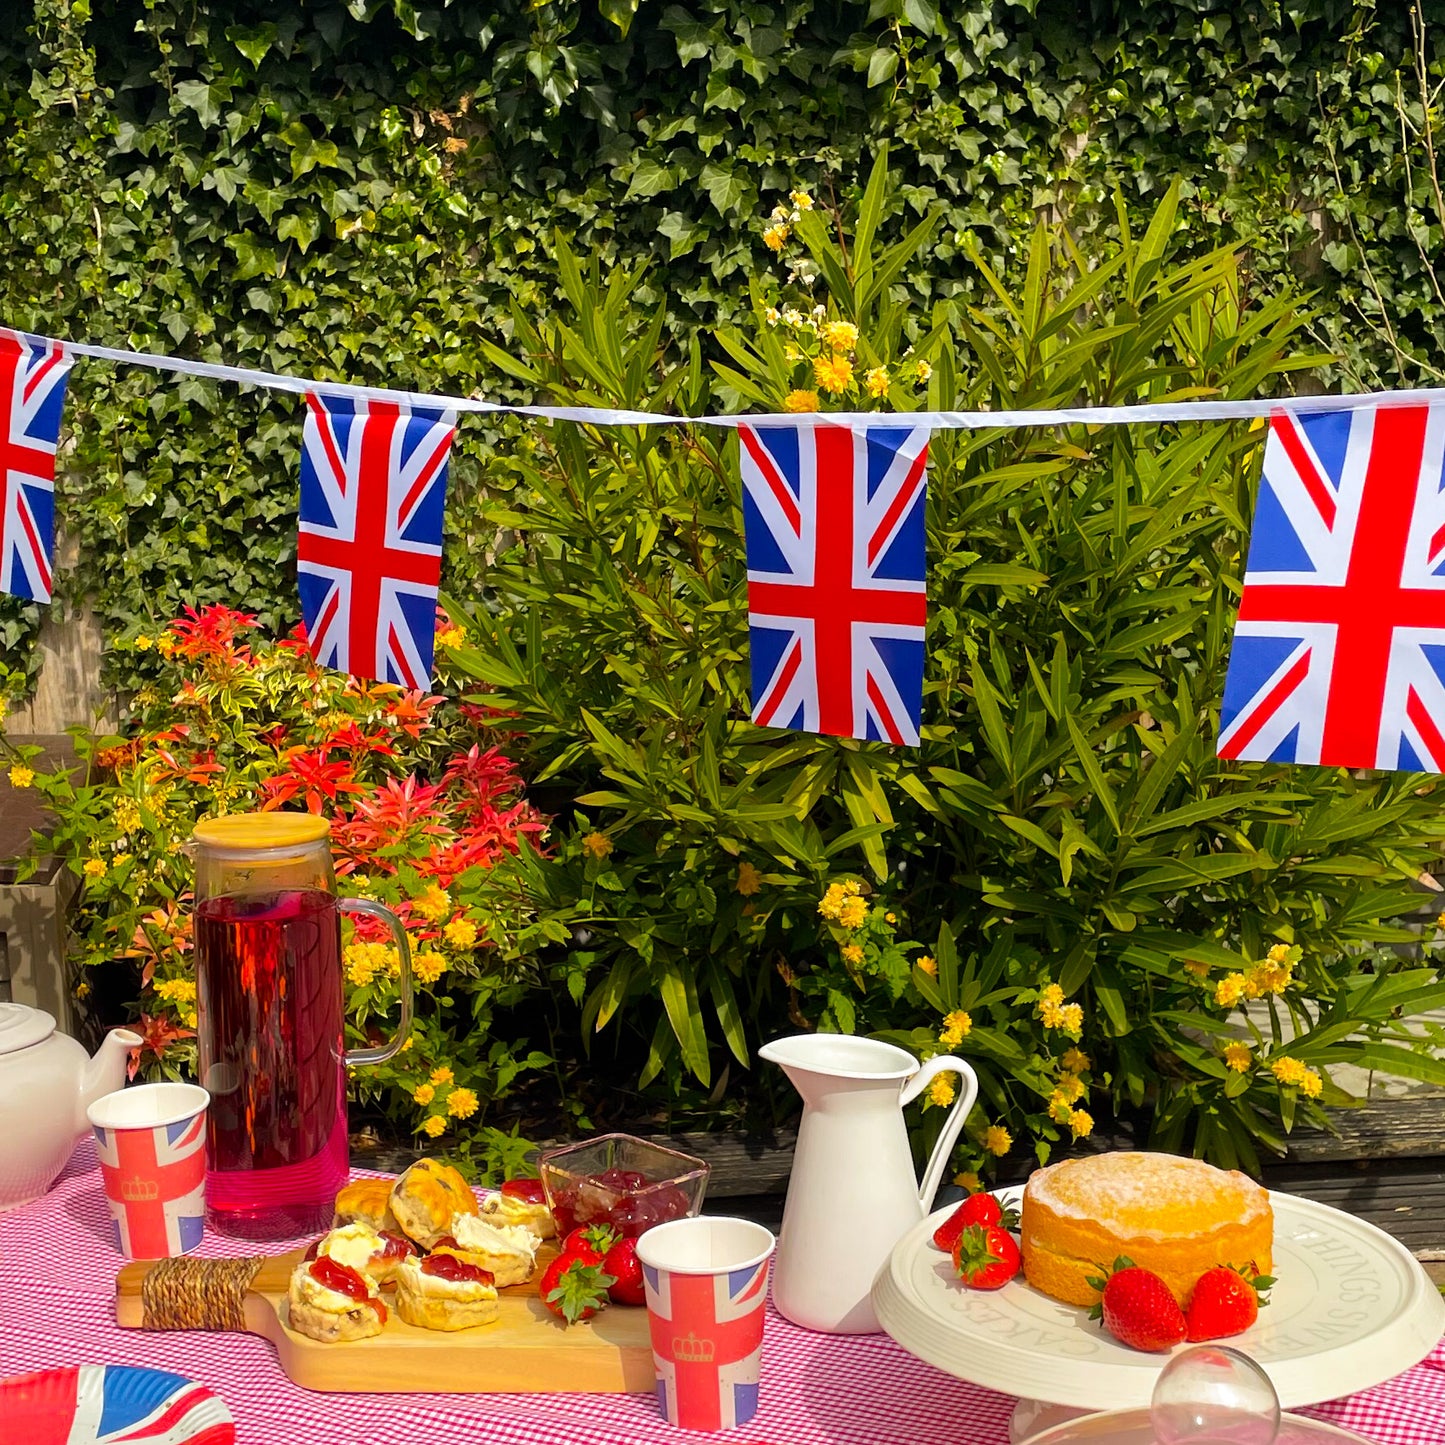 Union Jack 10 Metre Bunting with 24 Flags